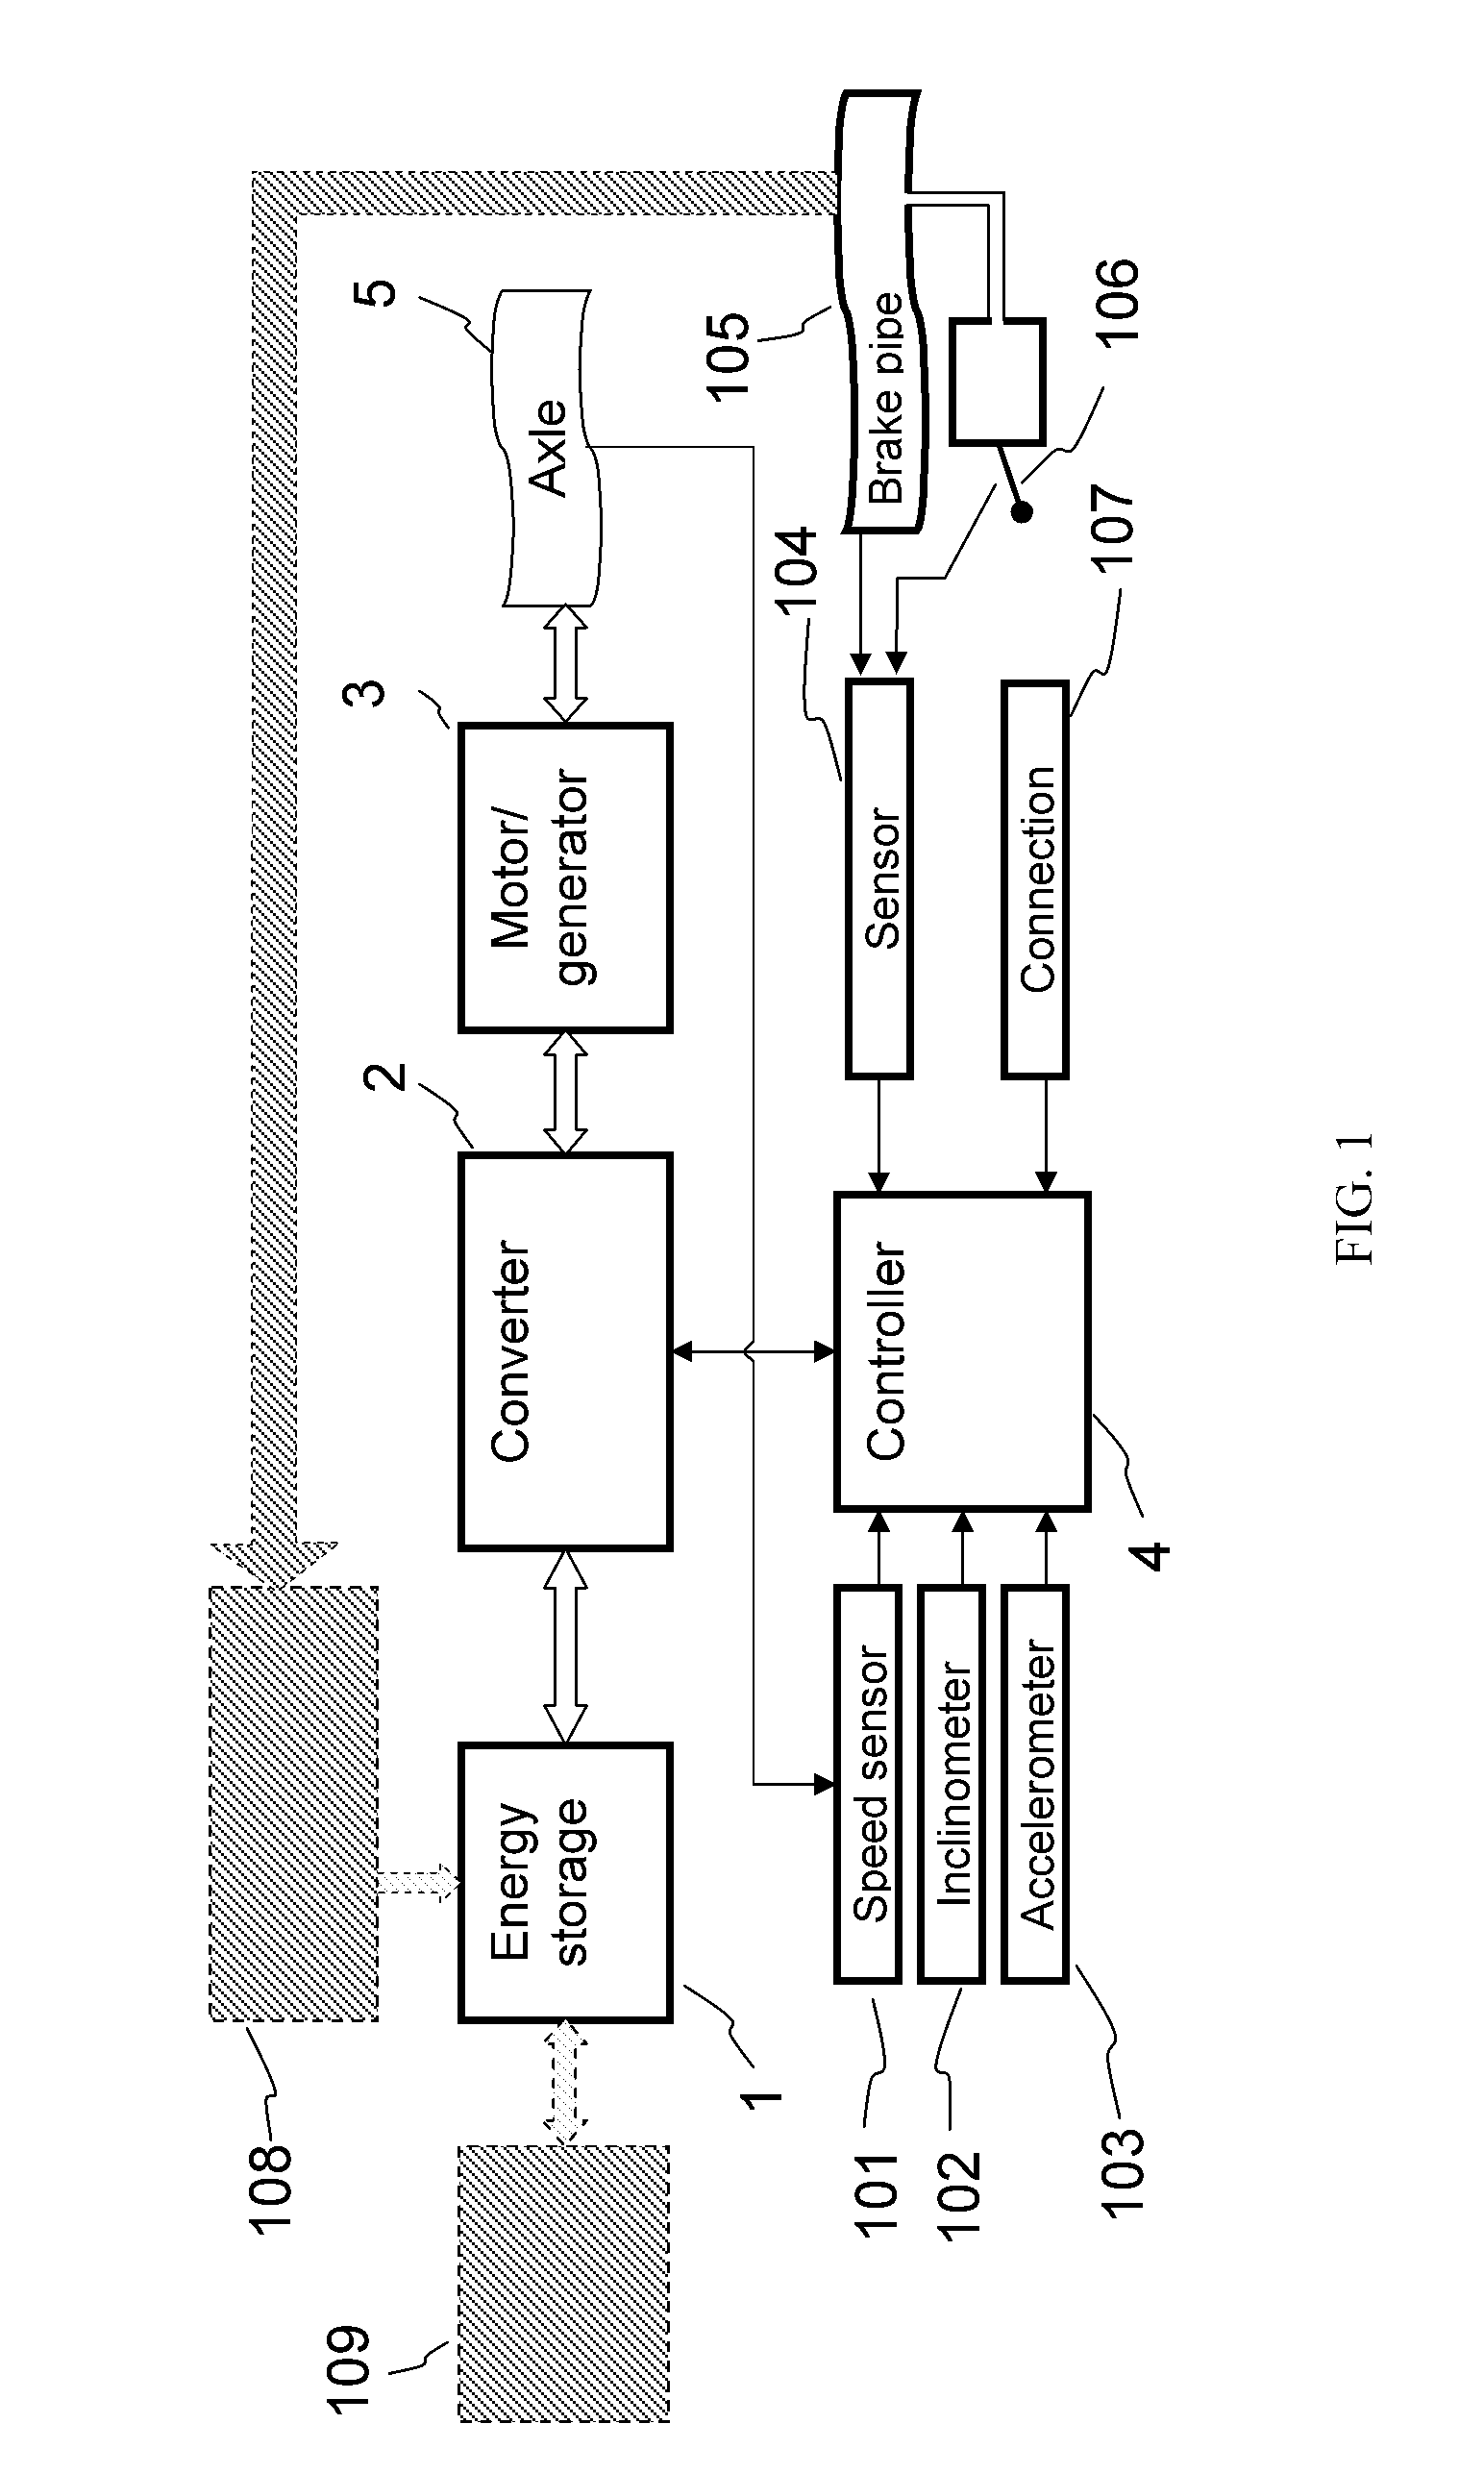 Quasi self-contained energy storage and power supply system